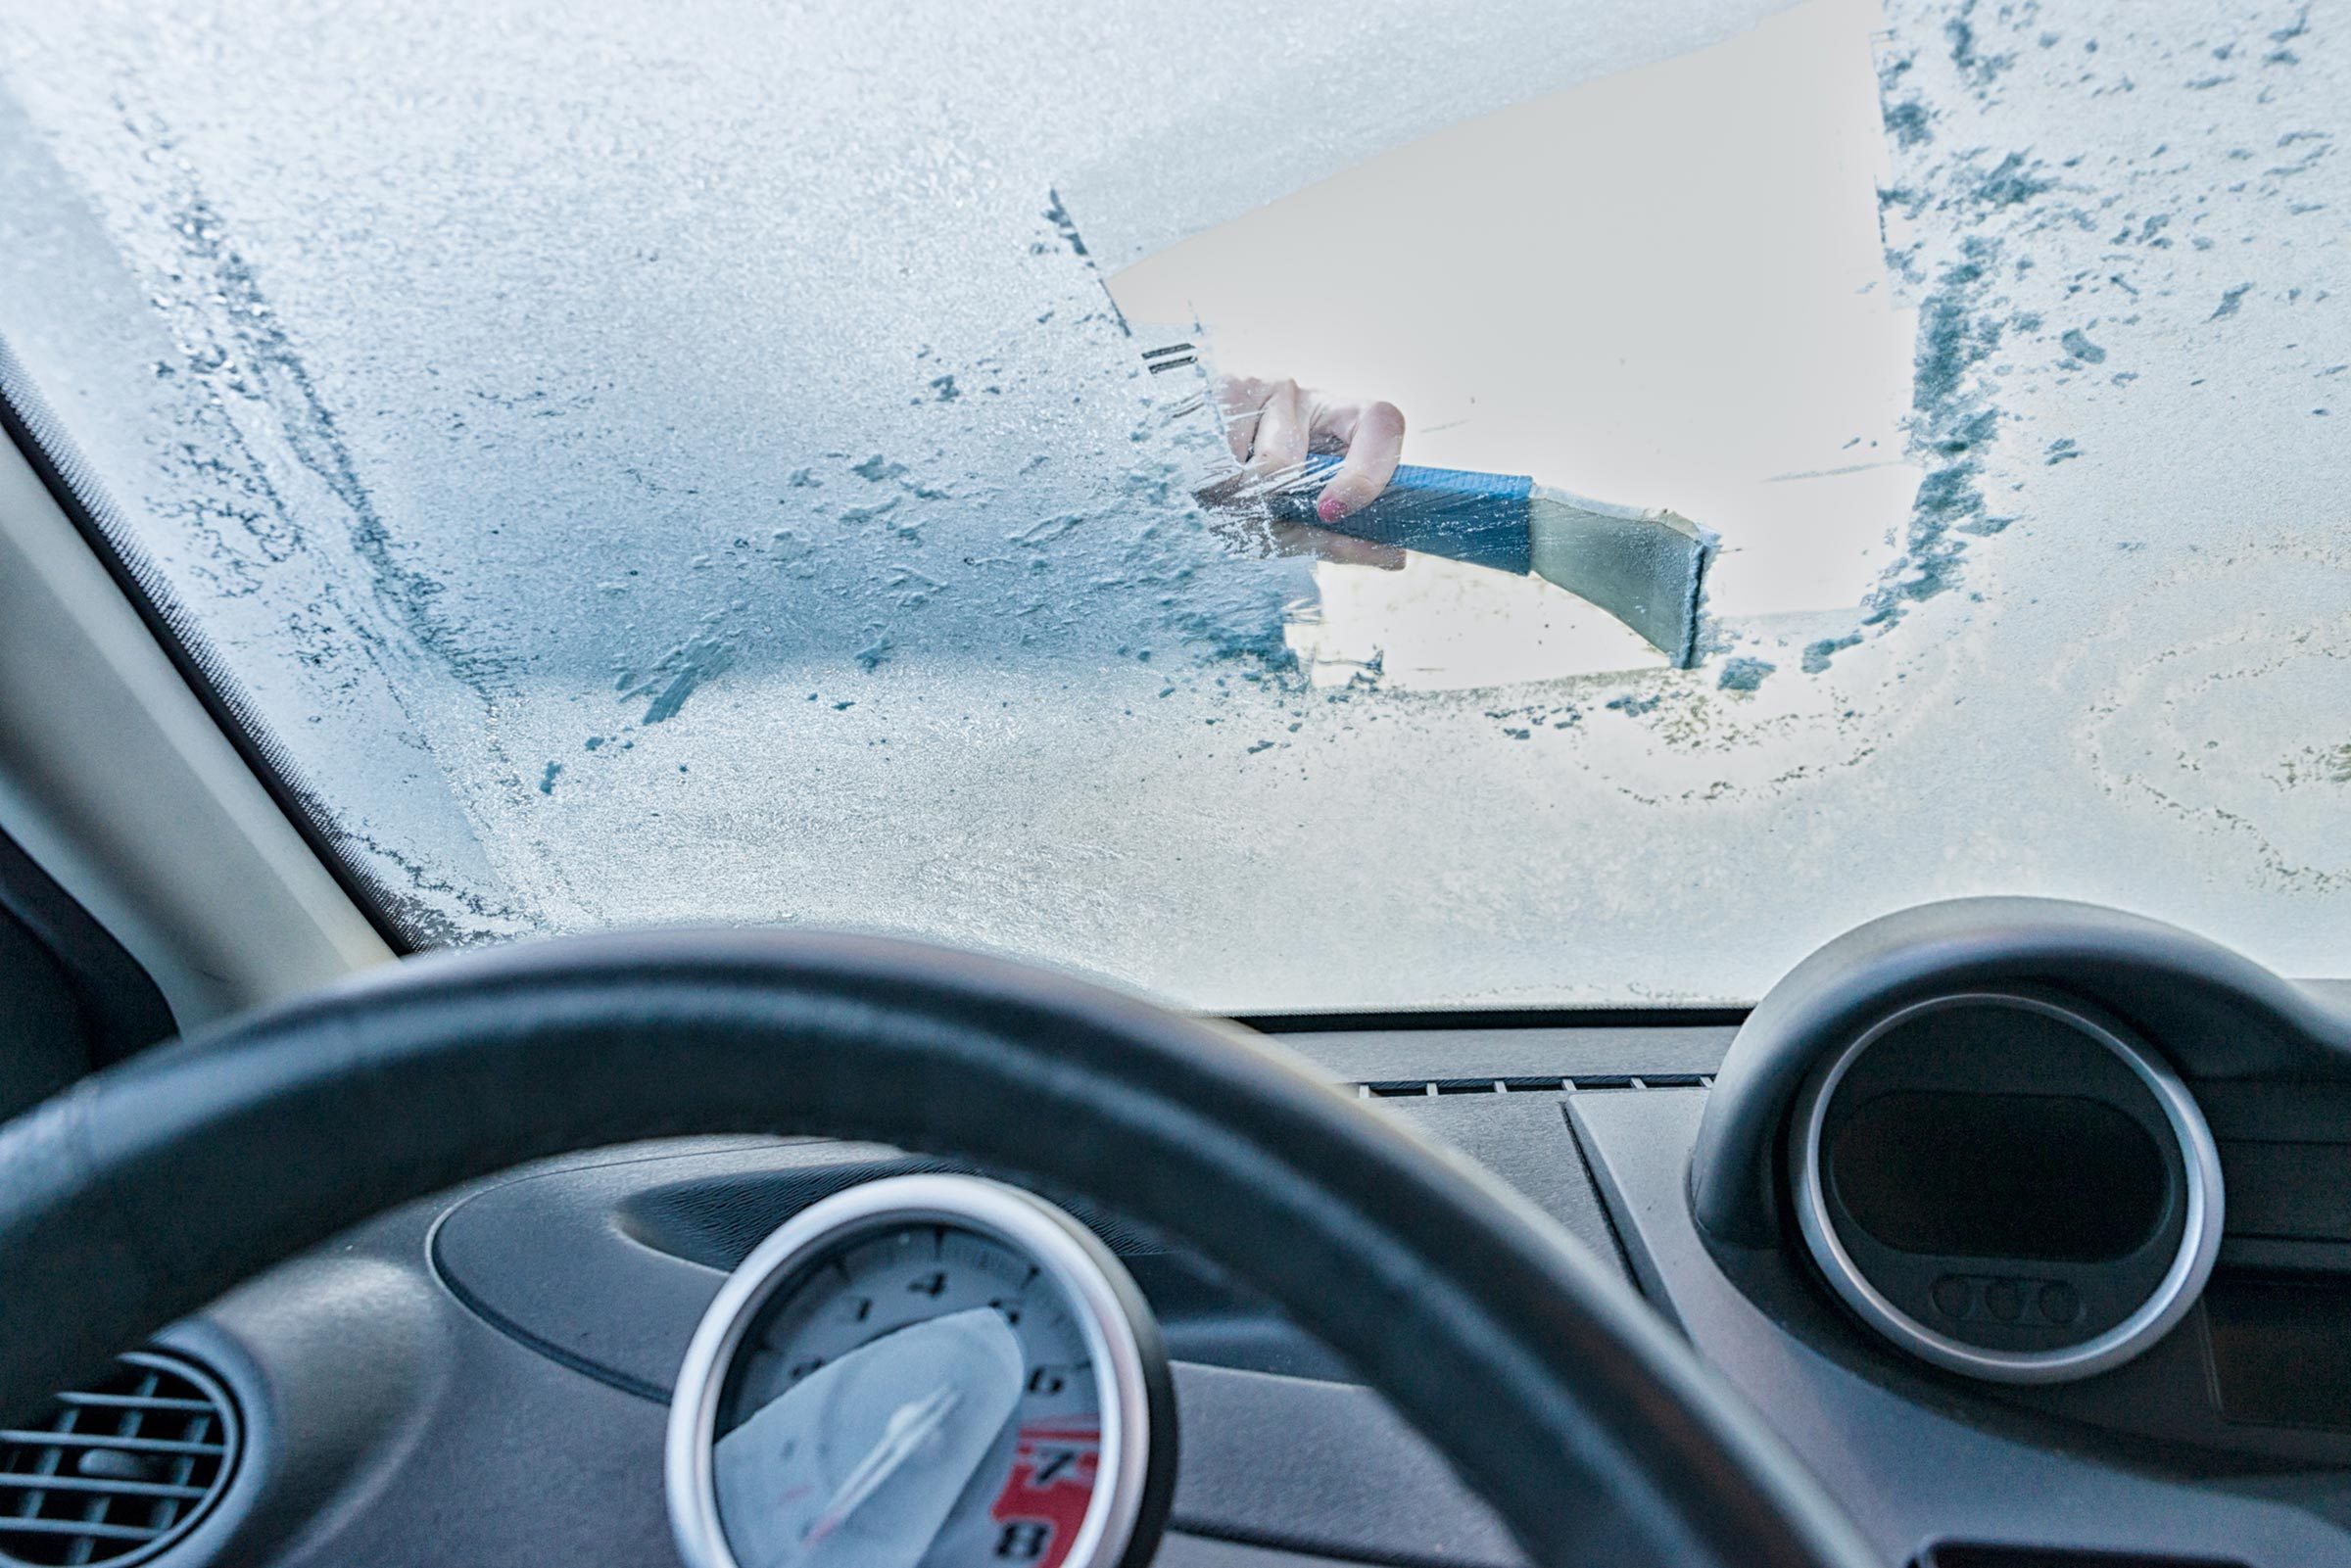 How to defog your car's windscreen quickly